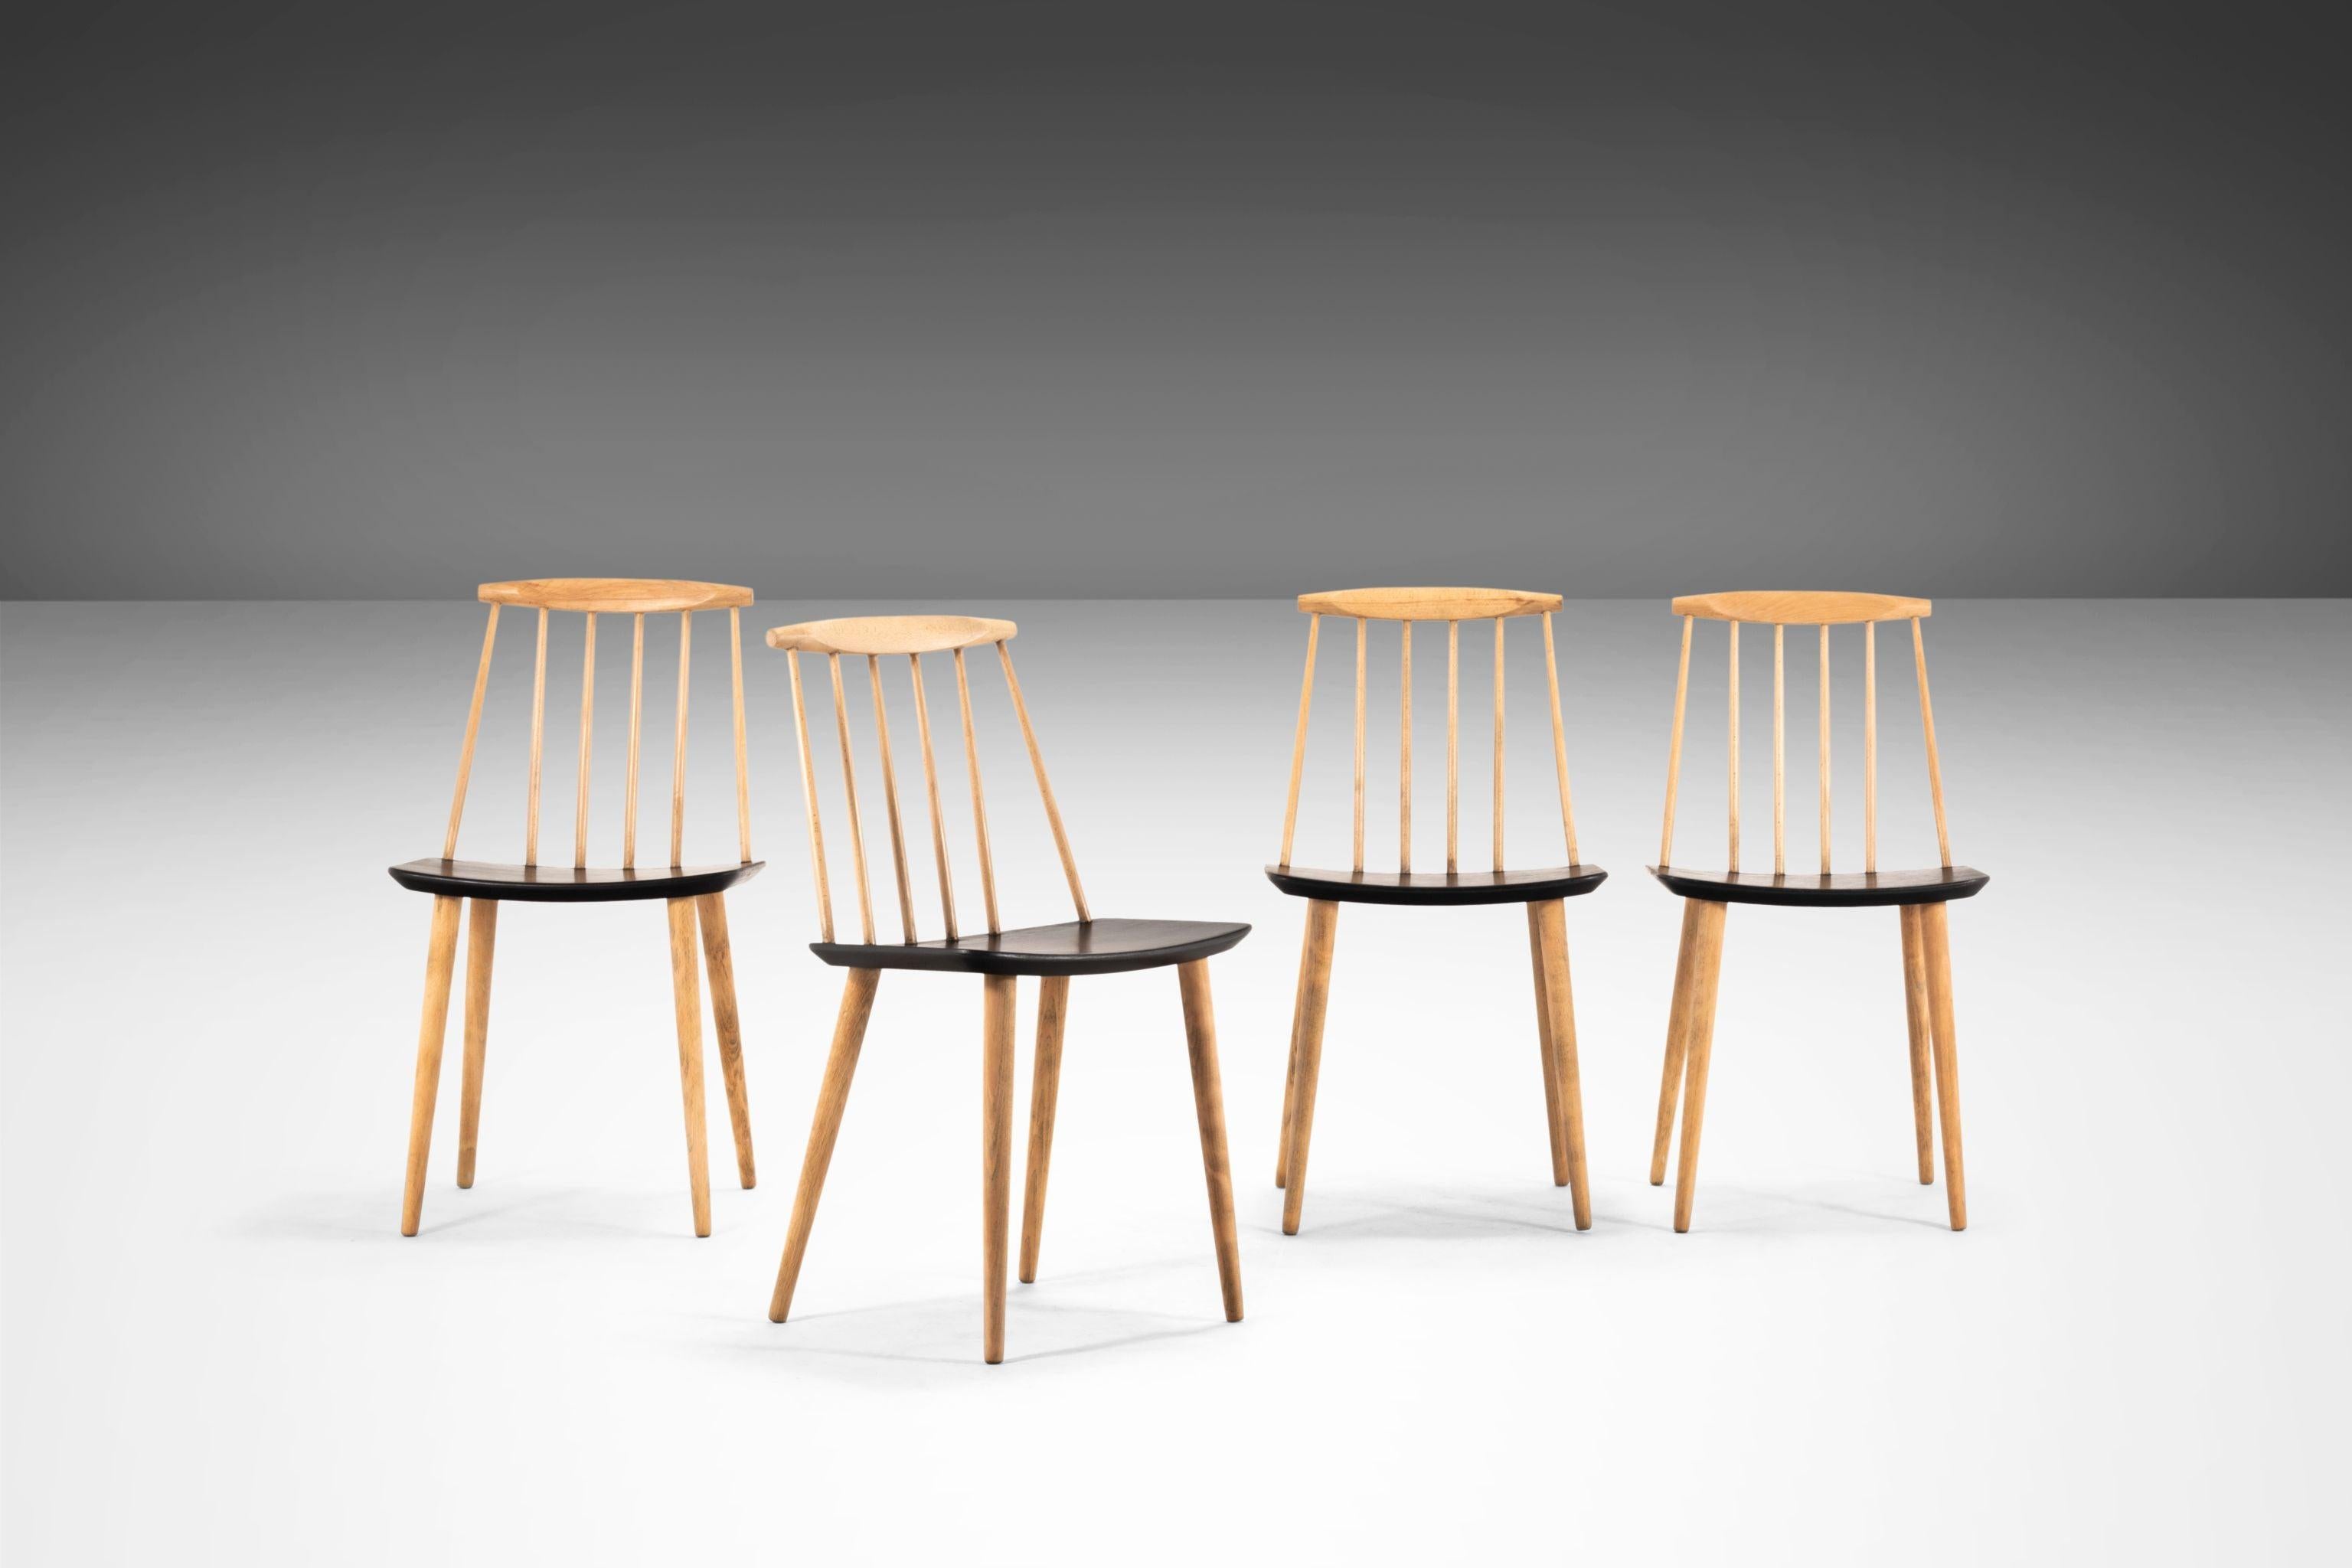 Mid-20th Century Set of 4 Model J 77 'Farmhouse' Chairs in Beech by Folke Palsson for FDB, 1960's For Sale